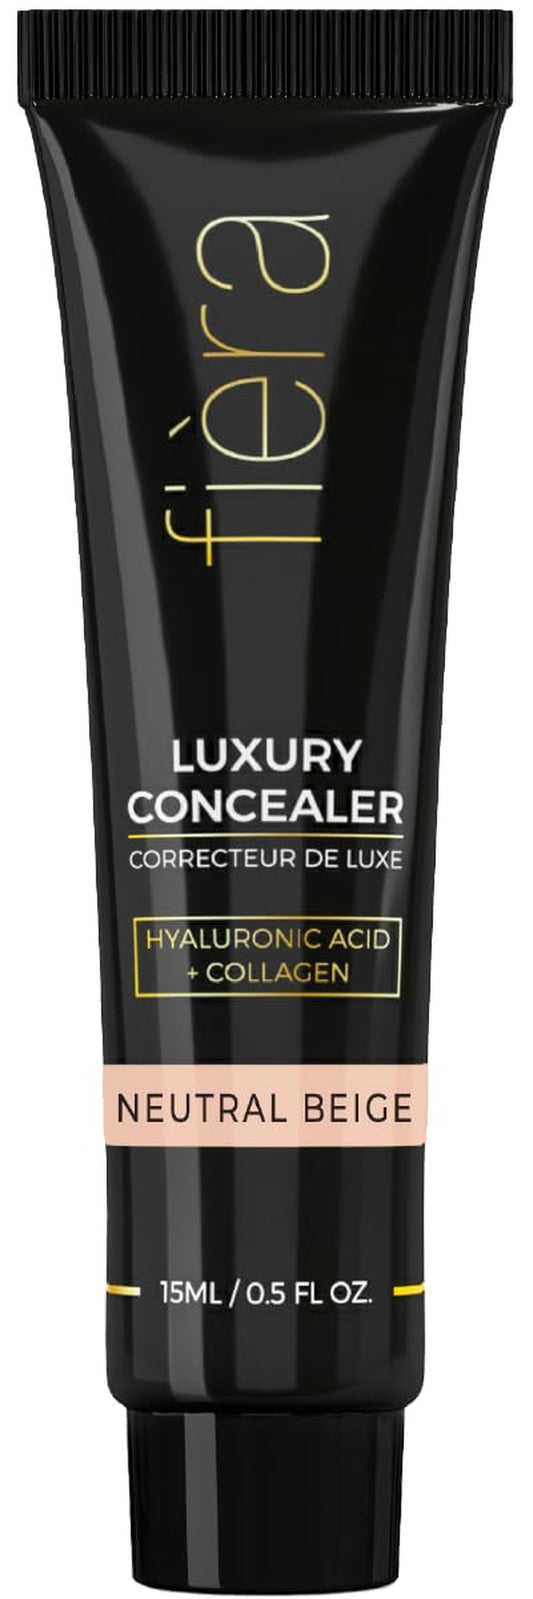 Luxury Concealer with Anti-Aging - All Day Coverage for Dark Circles, Fine Lines, Wrinkles & Spots - Neutral Beige, 0.5 Ounce